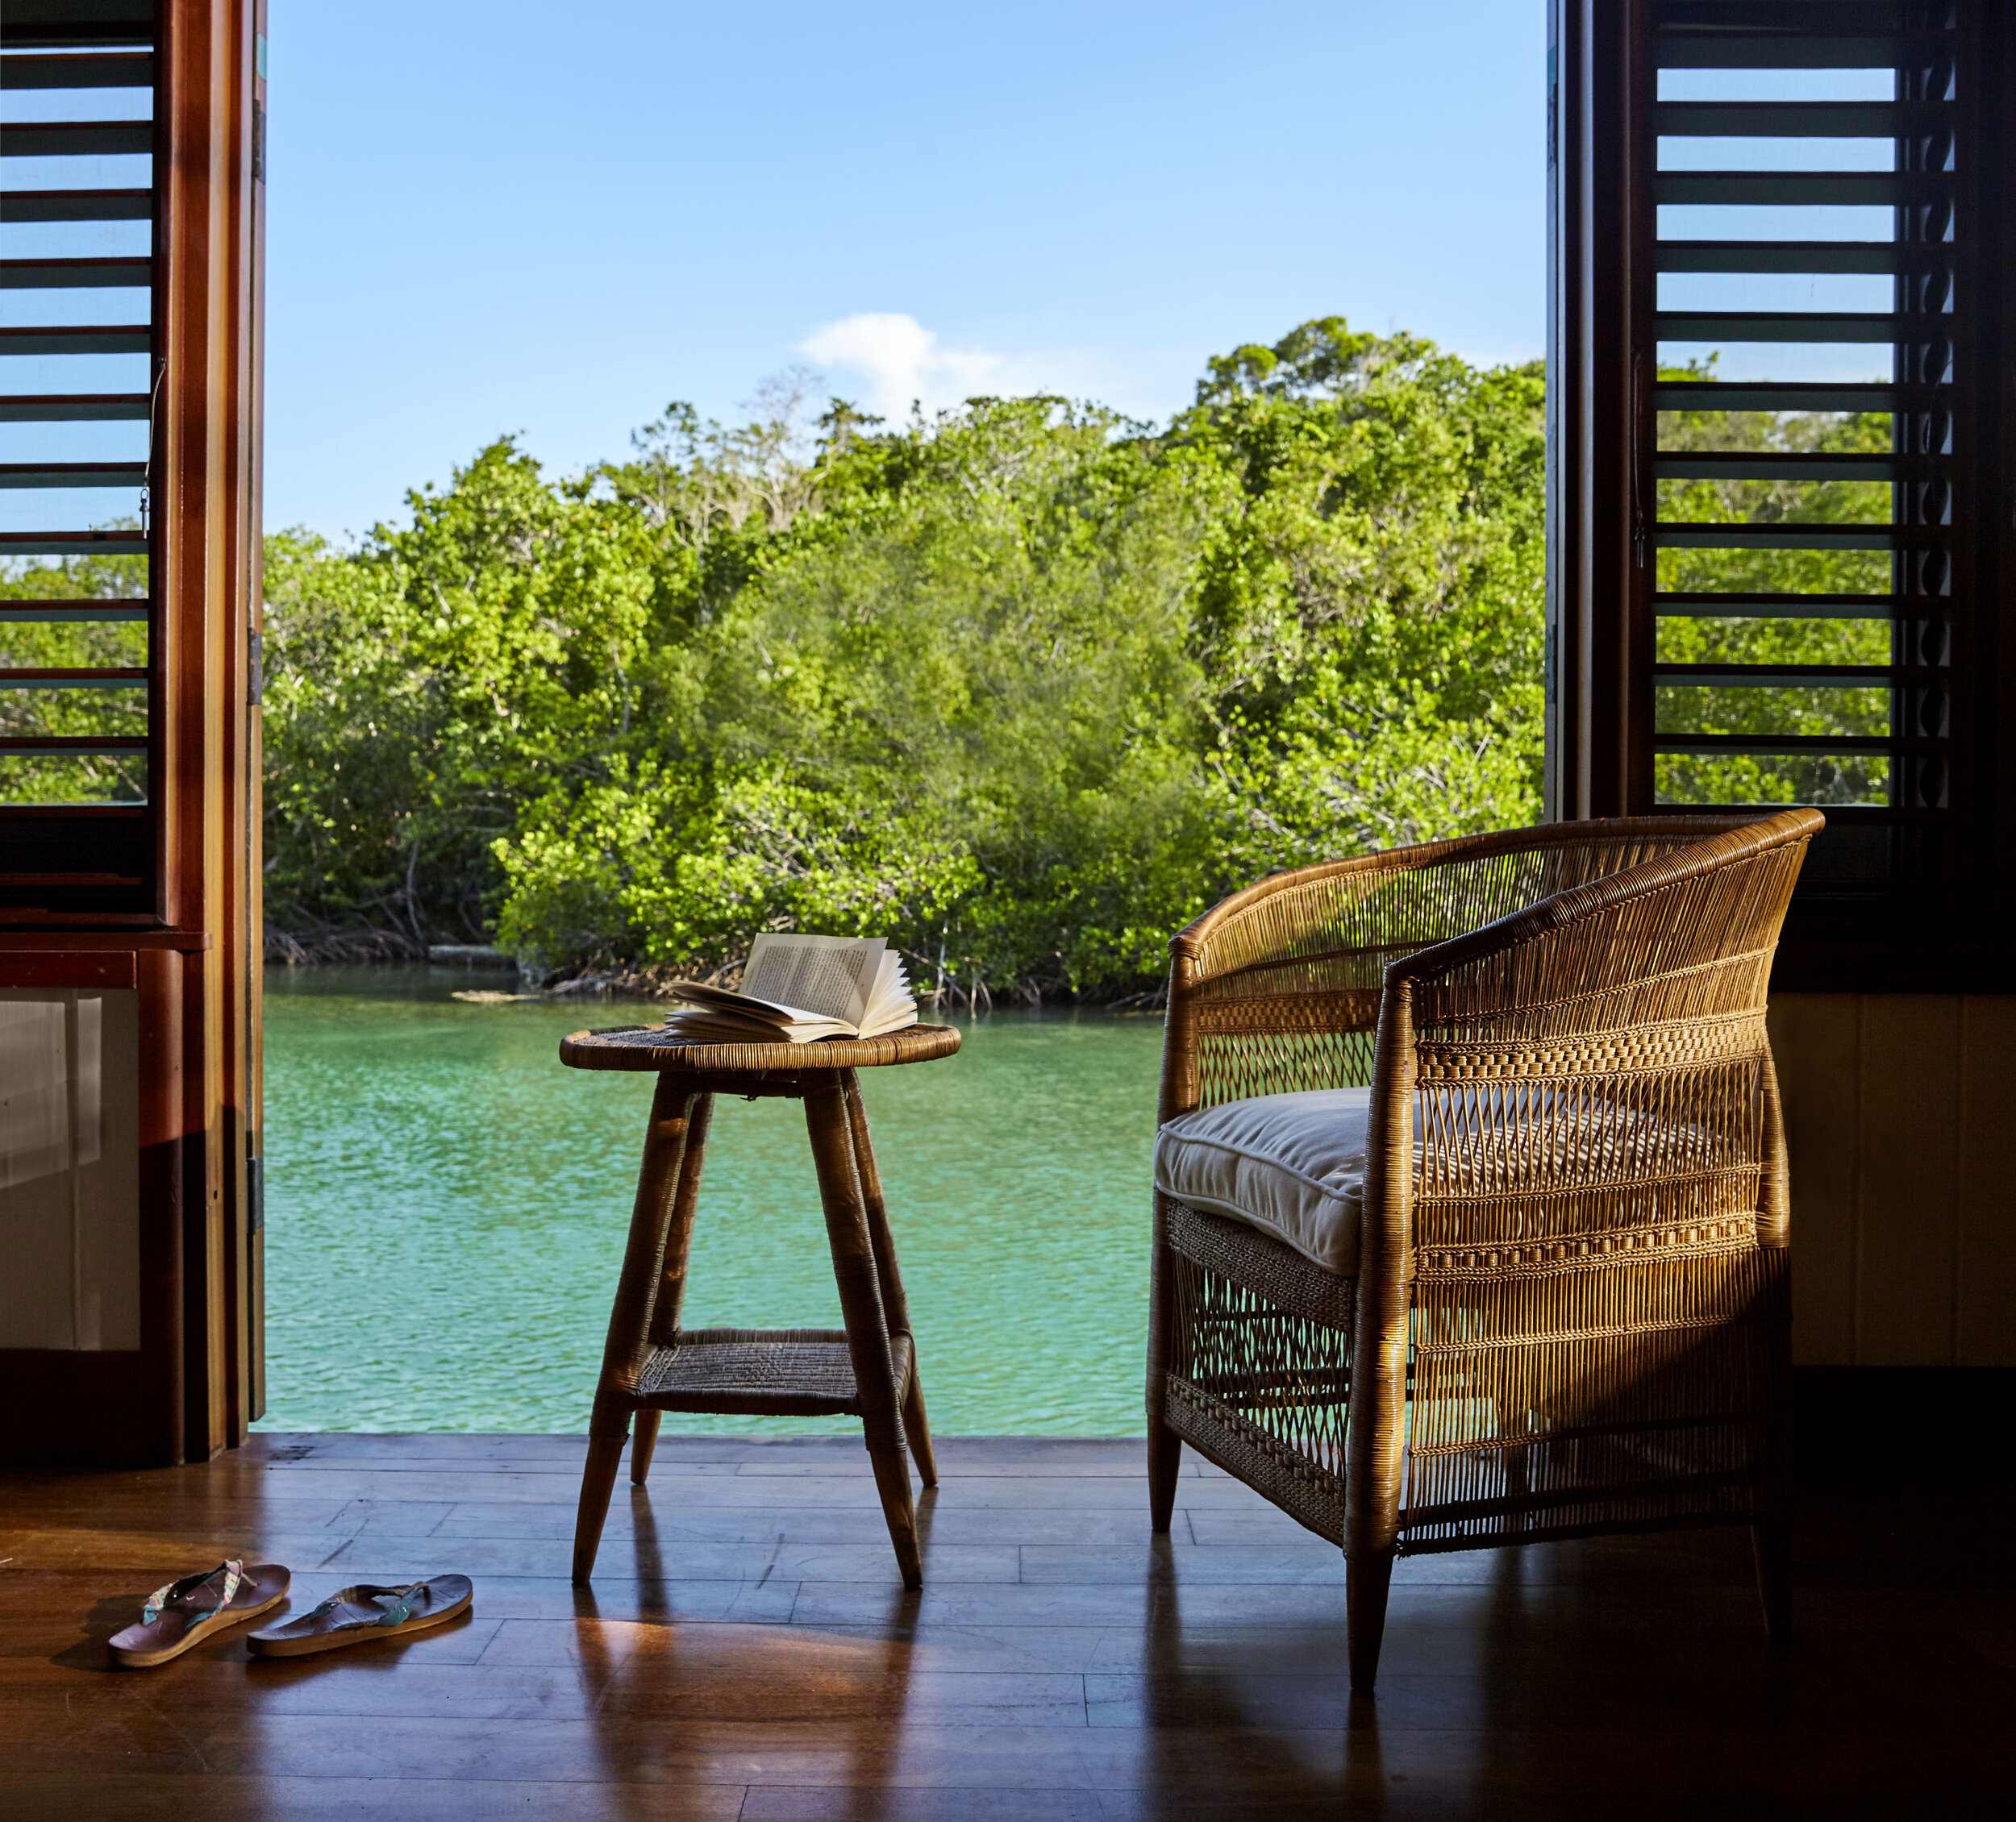   A tranquil moment in a Lagoon Cottage at GoldenEye (photo credit: Dominique DeBay Collection)  